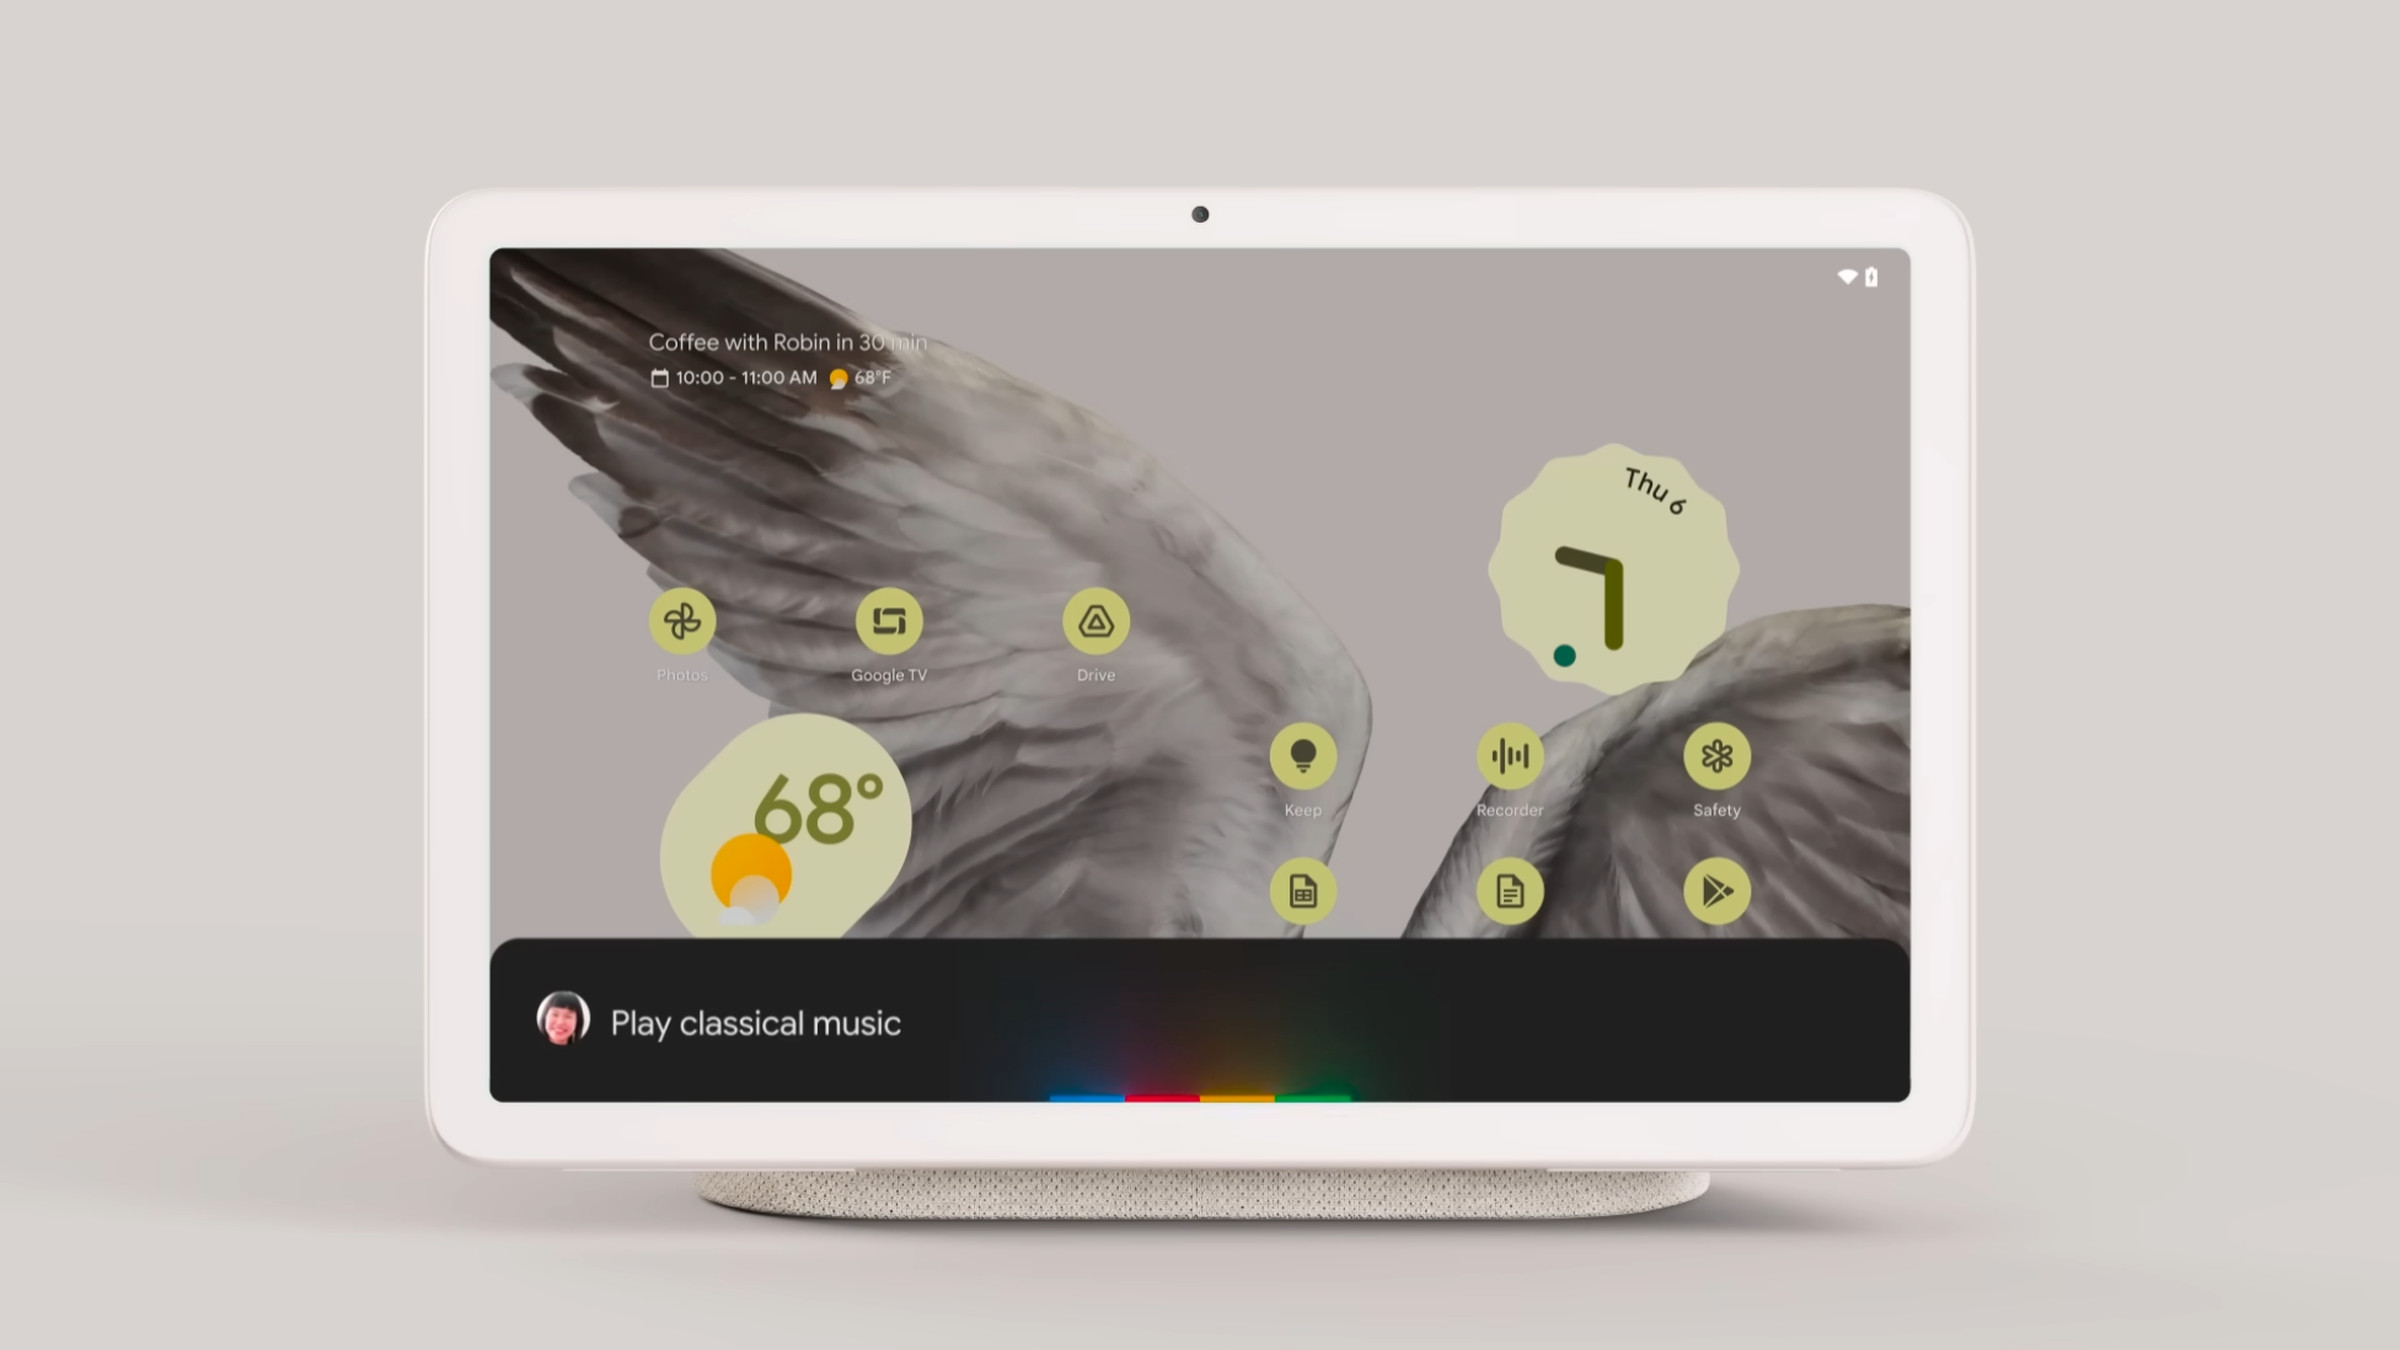 Photograph of a Nest Hub-like tablet on a speaker dock, displaying a Google Assistant toast at the bottom.